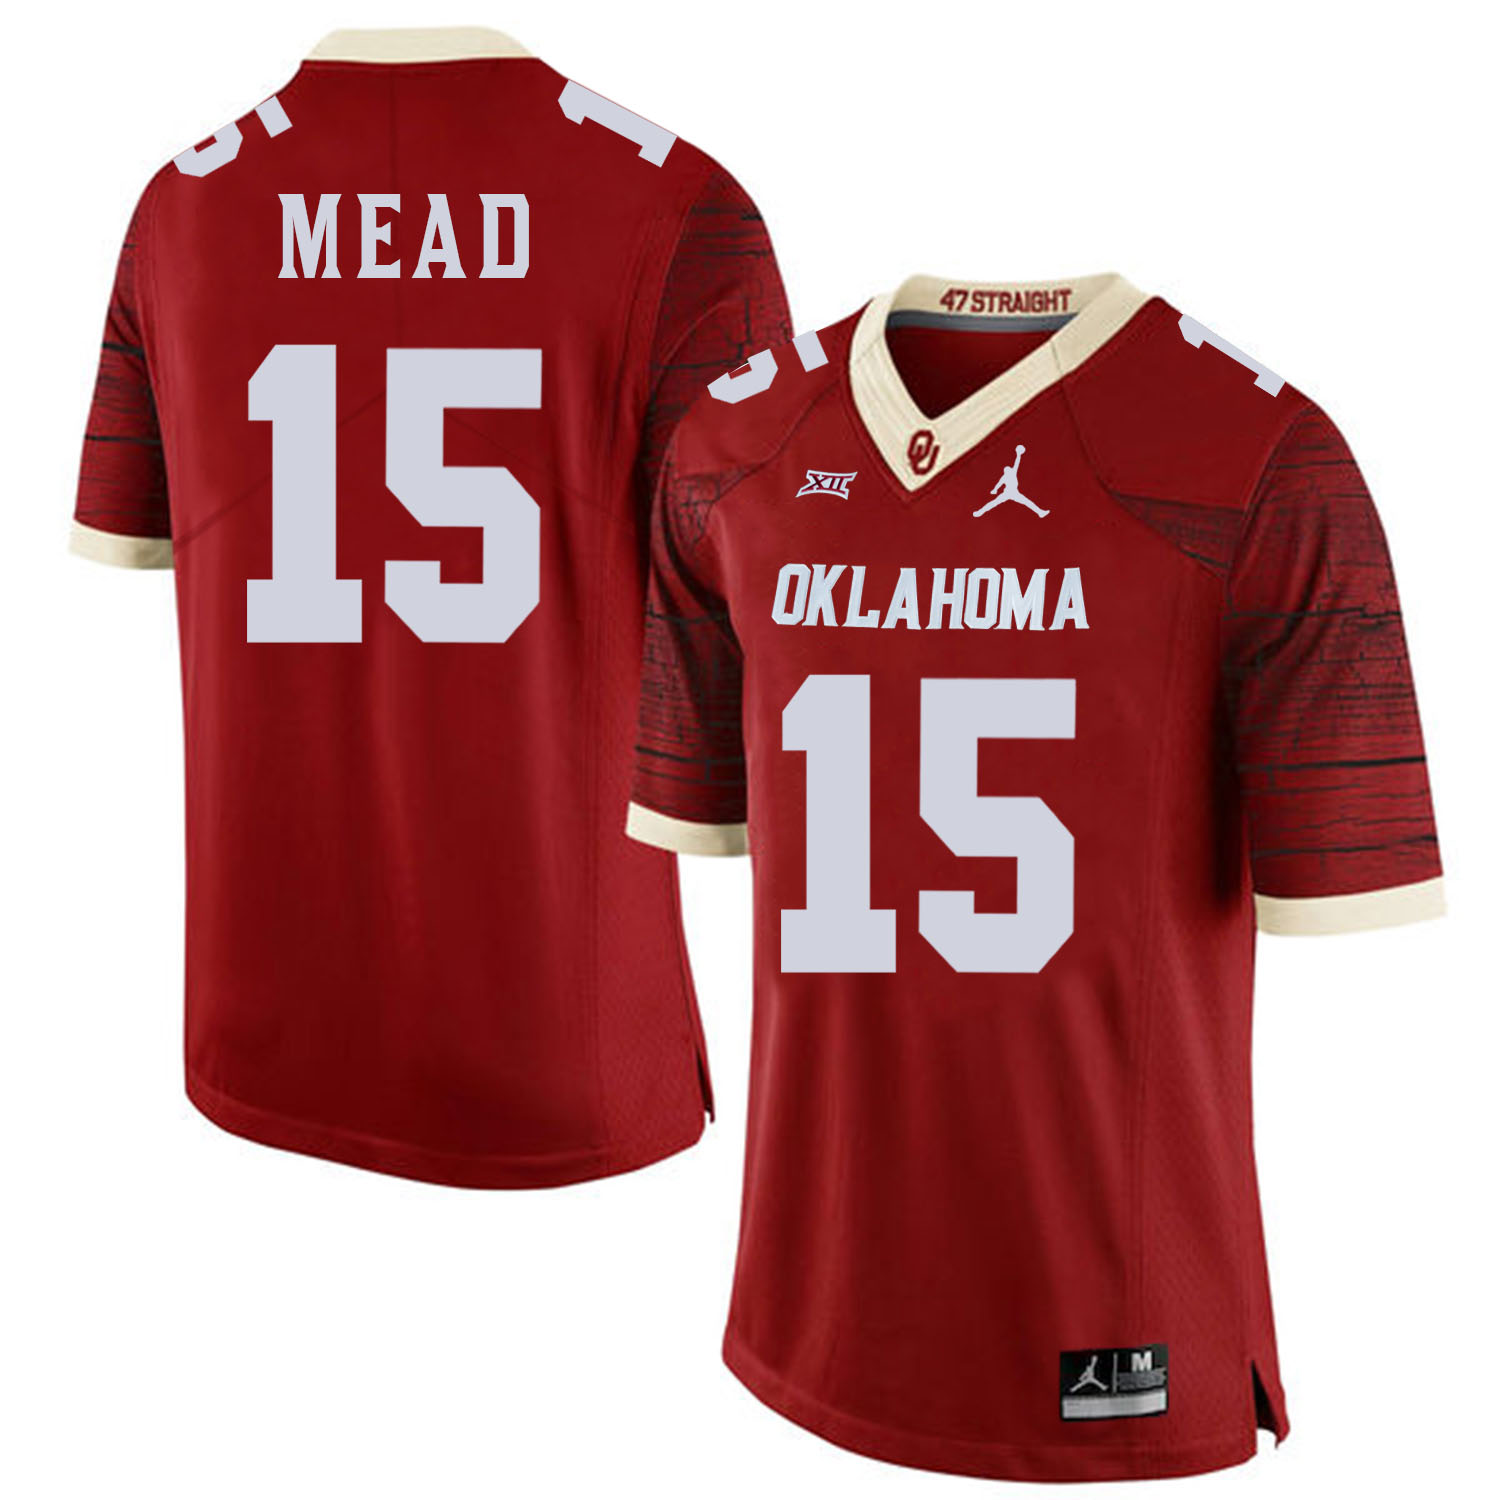 Oklahoma Sooners 15 Jeffery Mead Red 47 Game Winning Streak College Football Jersey - Click Image to Close